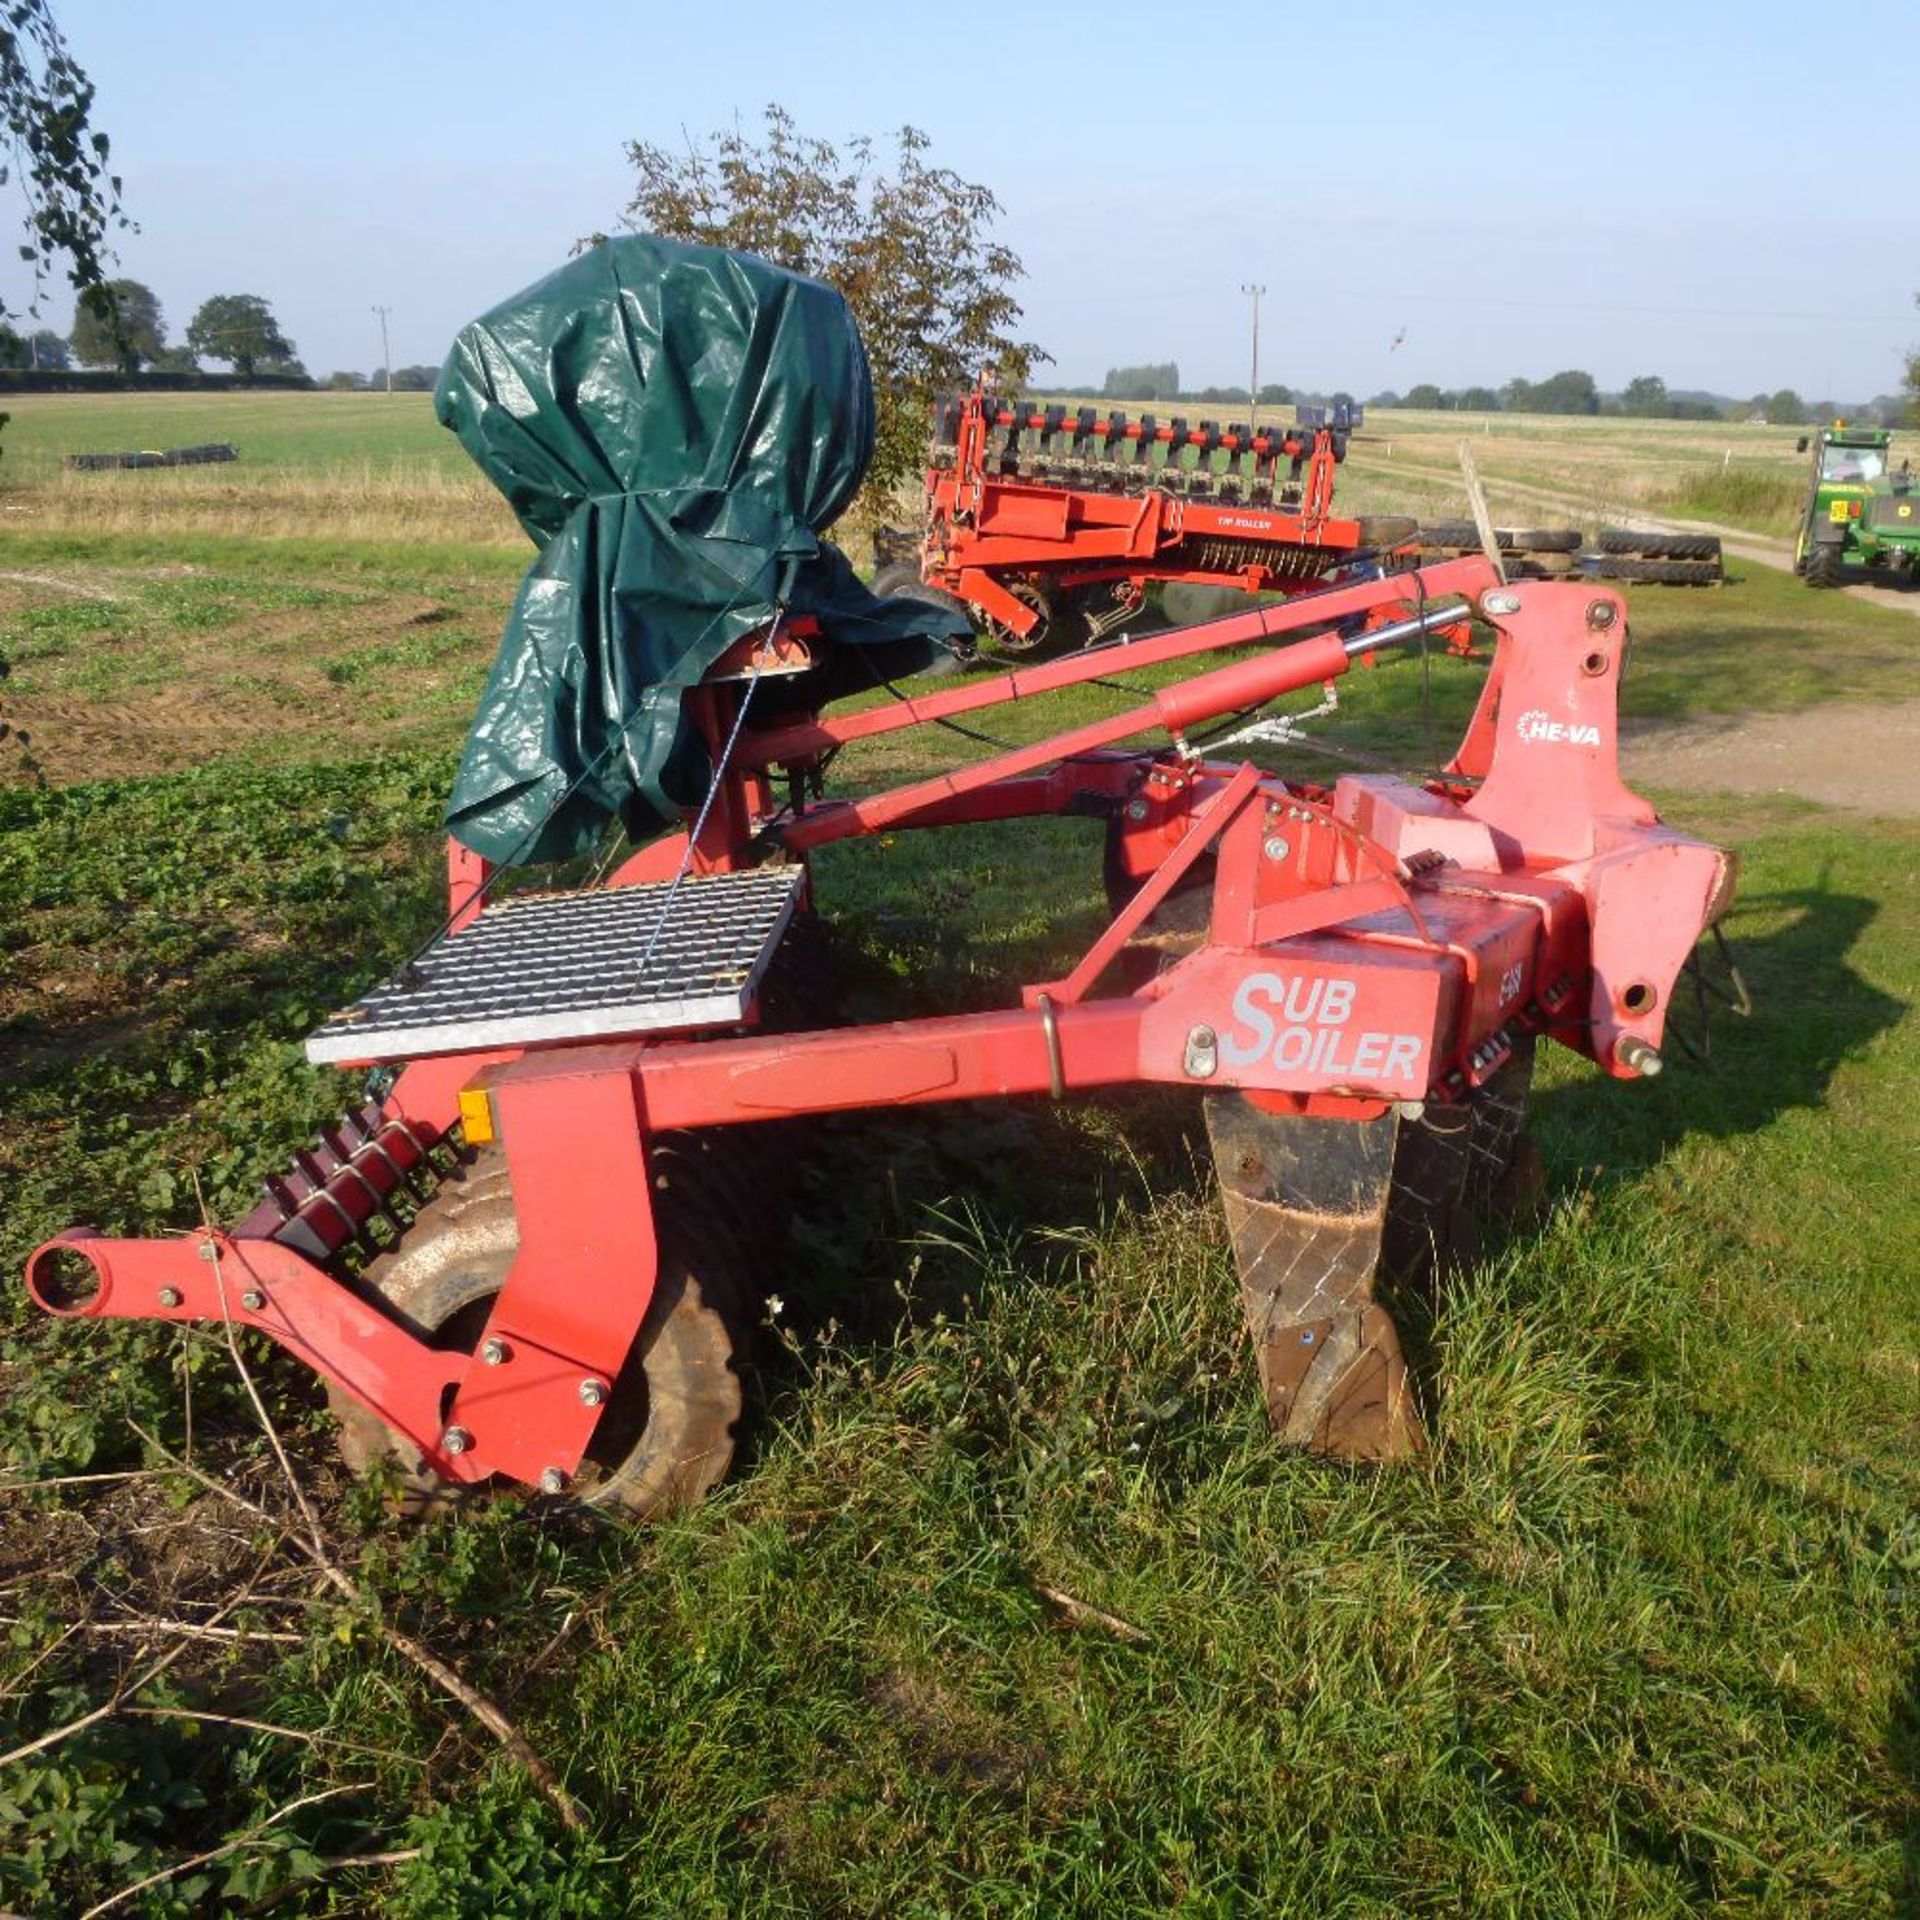 HE - VA 5 tine subsoiler with roll (SN28588) and air seeder unit, c/w homemade attachment for discs, - Image 6 of 7